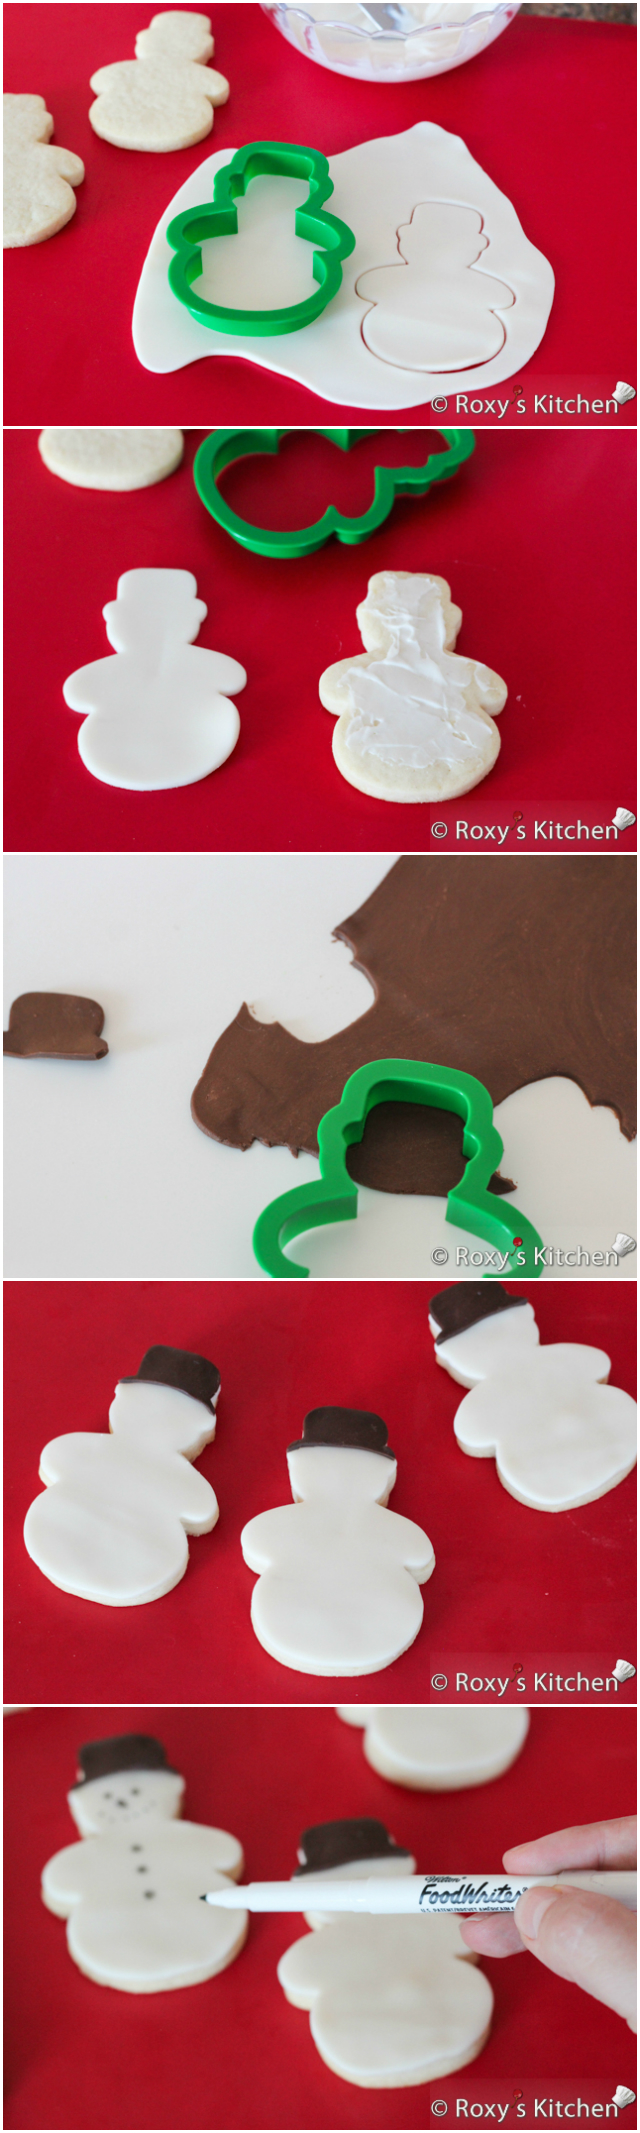 Christmas Sugar Cookies Covered with Modeling Chocolate - HO HO HO, snowmen, reindeer, Christmas trees, stockings & presents | Roxy's Kitchen